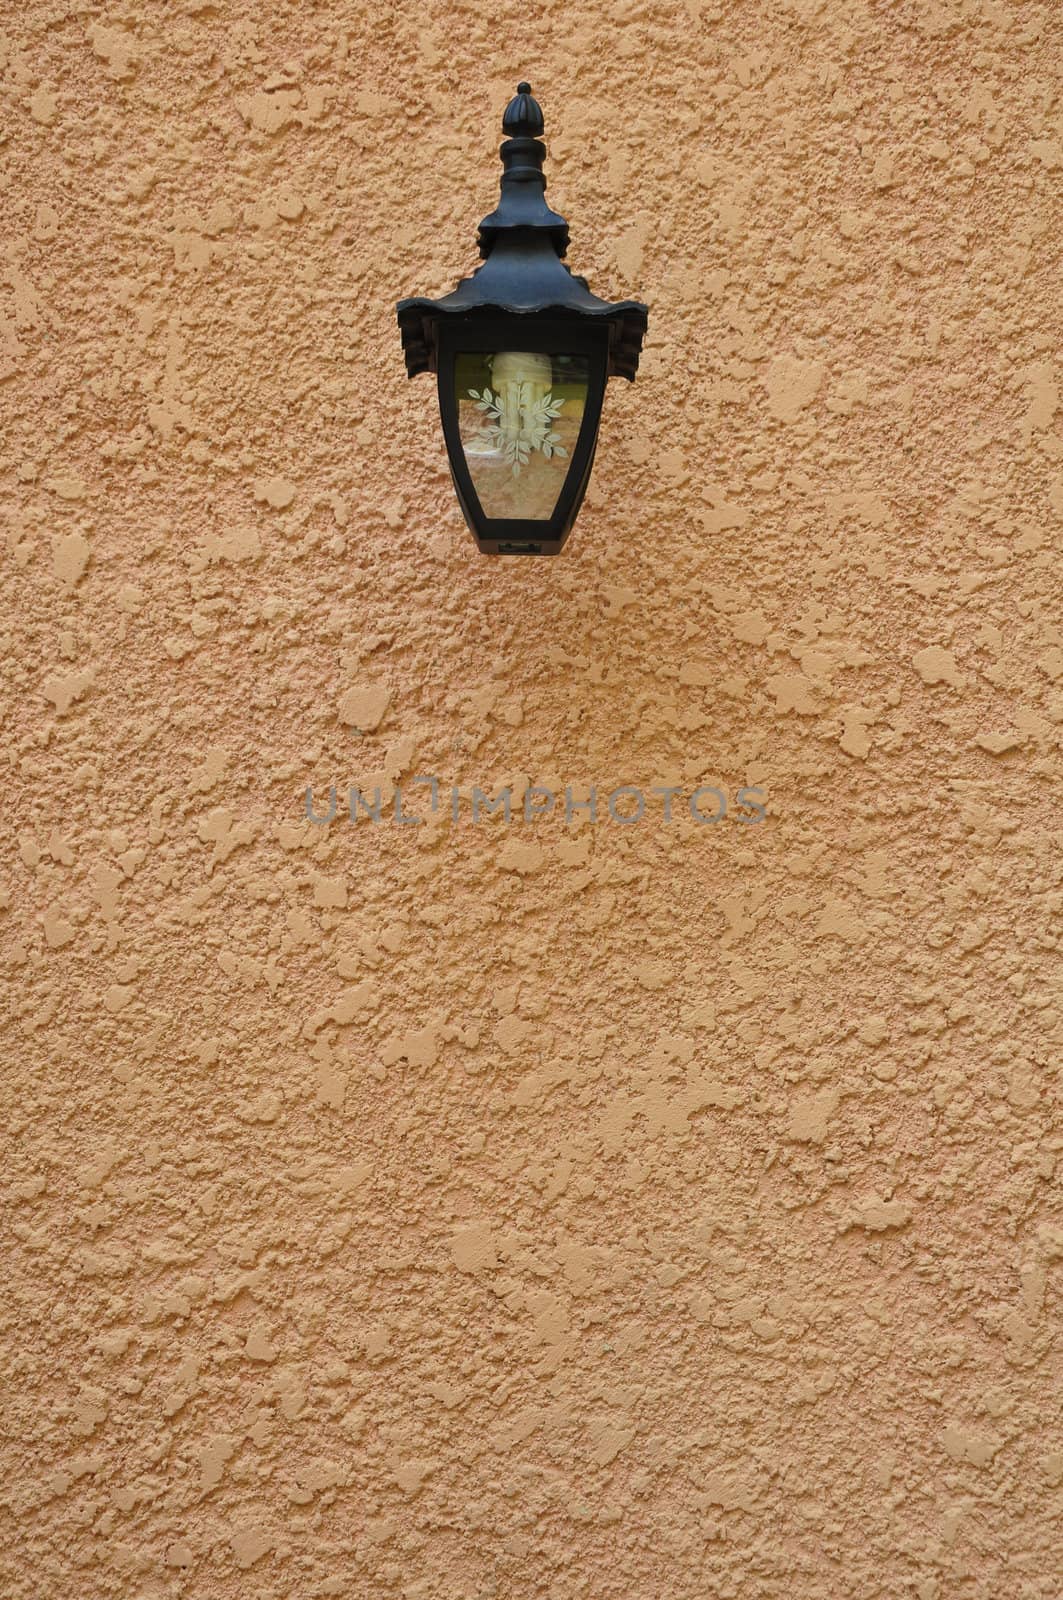 Wall lamp by antpkr